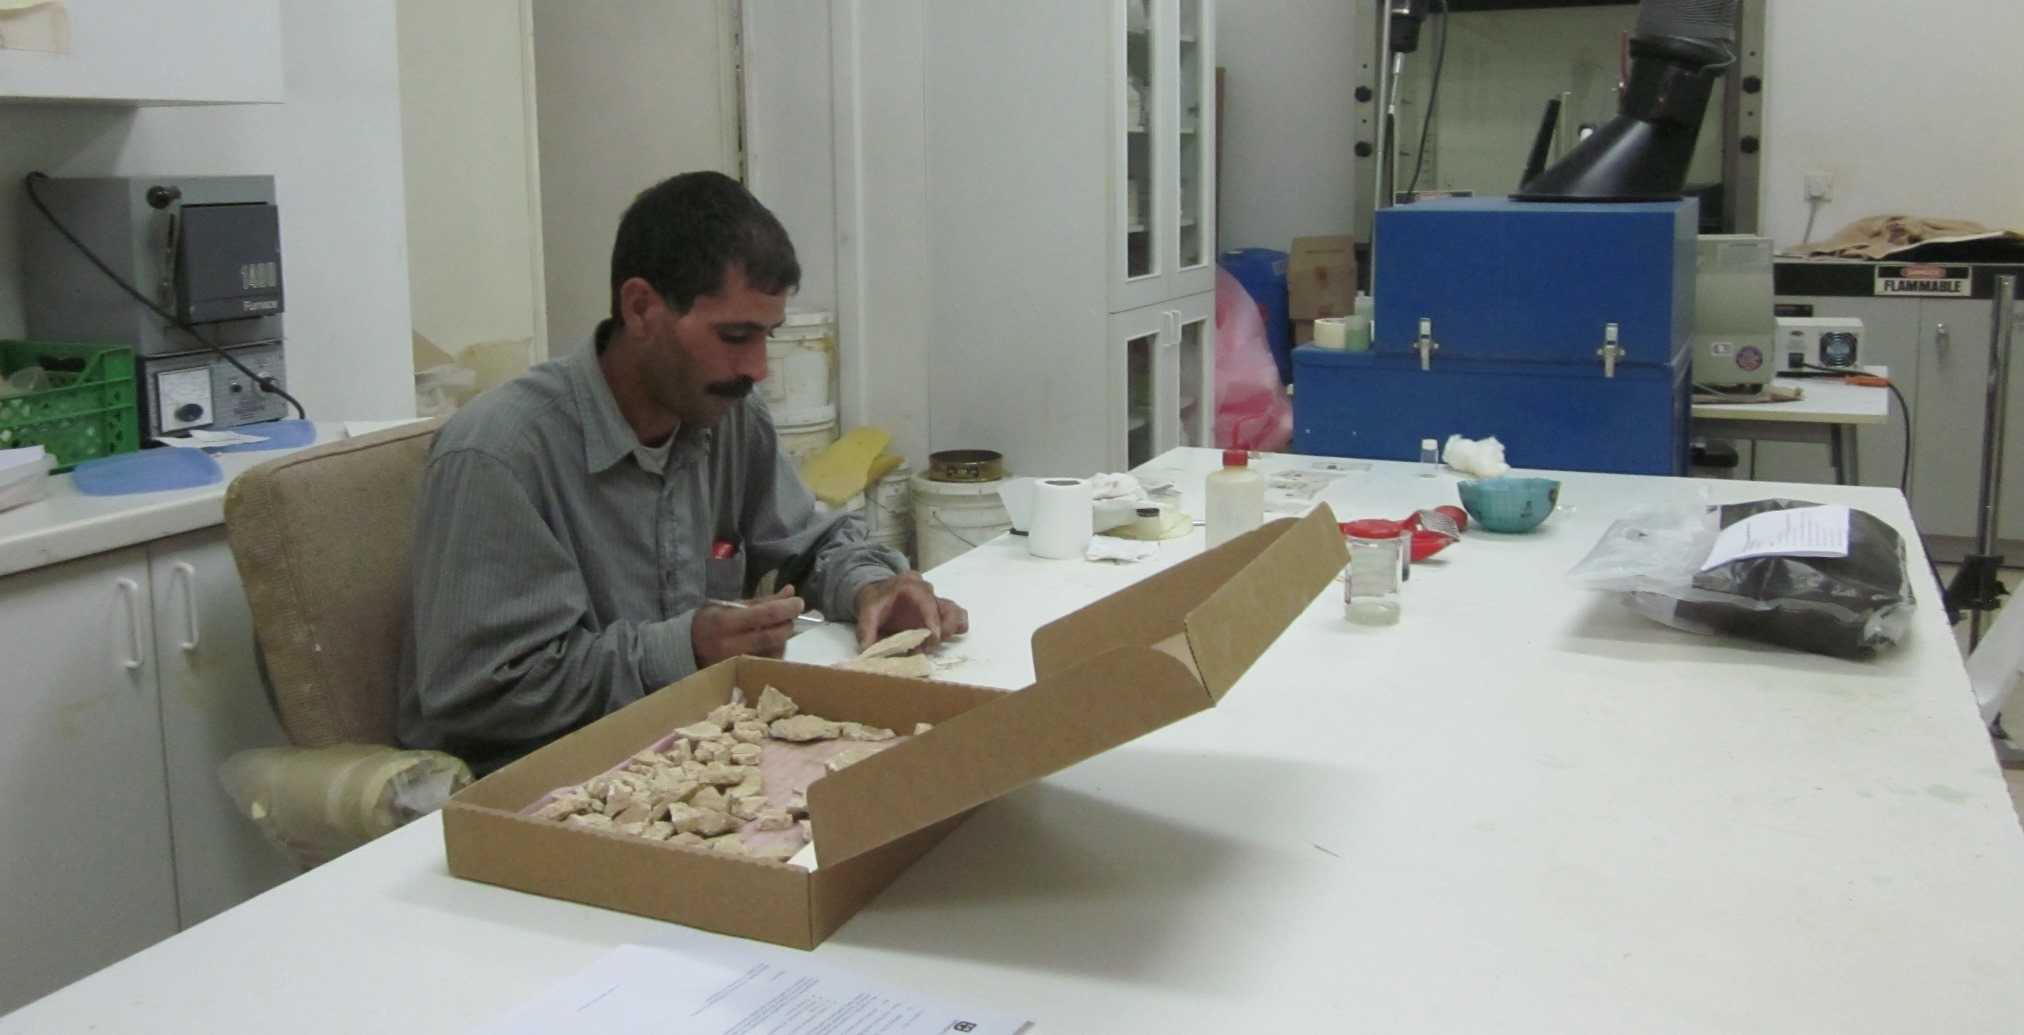 Naif Zaban in the ACOR Conservation Lab treating wall plaster fragments found in the Ayn Gharandal fort by the University of Tennessee team under Robert and Erin Darby. Photo by Barbara A. Porter.